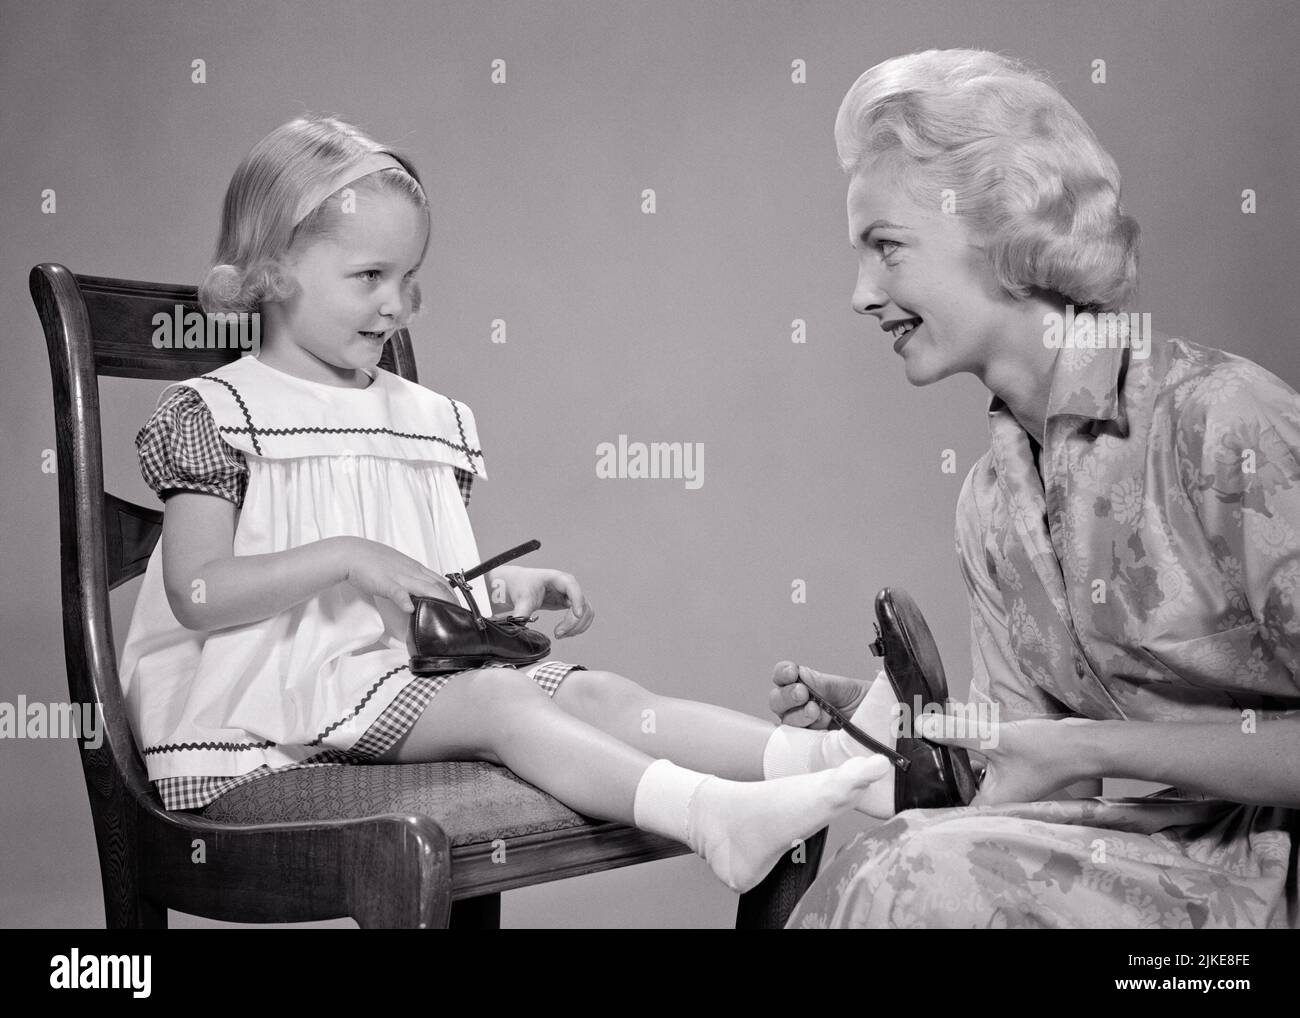 1960s BLONDE WOMAN MOTHER HELPING SMILING THREE YEAR OLD GIRL DAUGHTER PUT ON HER BLACK PATENT LEATHER MARY JANE SHOES - j8317 HAR001 HARS URBAN HER MOTHERS OLD TIME NOSTALGIA OLD FASHION 1 JUVENILE STYLE COMMUNICATION BLOND TEAMWORK STRONG PLEASED FAMILIES JOY LIFESTYLE PARENTING CELEBRATION FEMALES HOME LIFE FULL-LENGTH HALF-LENGTH LADIES DAUGHTERS PERSONS CARING CONFIDENCE MARY B&W PATENT WIDE ANGLE PUT HAPPINESS CHEERFUL EXCITEMENT MARY JANE PRIDE ON SMILES CONNECTION CONCEPTUAL JOYFUL STYLISH PERSONAL ATTACHMENT AFFECTION COOPERATION EMOTION GROWTH JANE JUVENILES MID-ADULT MID-ADULT WOMAN Stock Photo